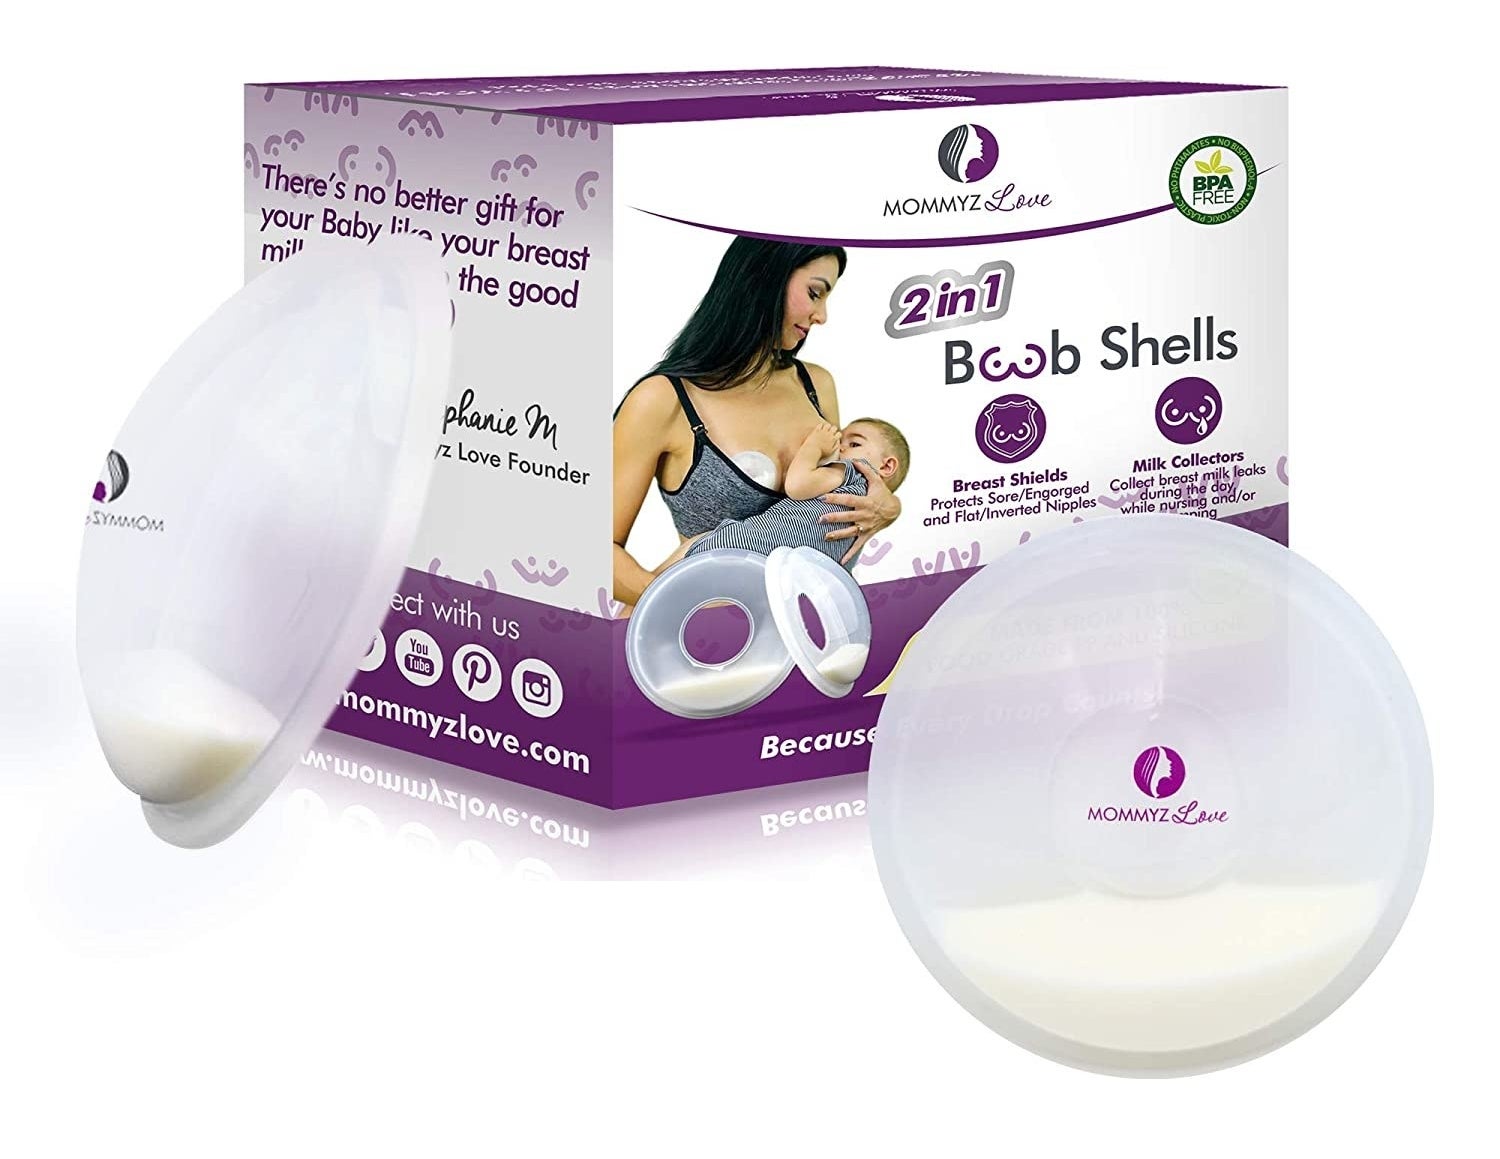 Purple and white packaging as well as two breast shells partially filled with milk